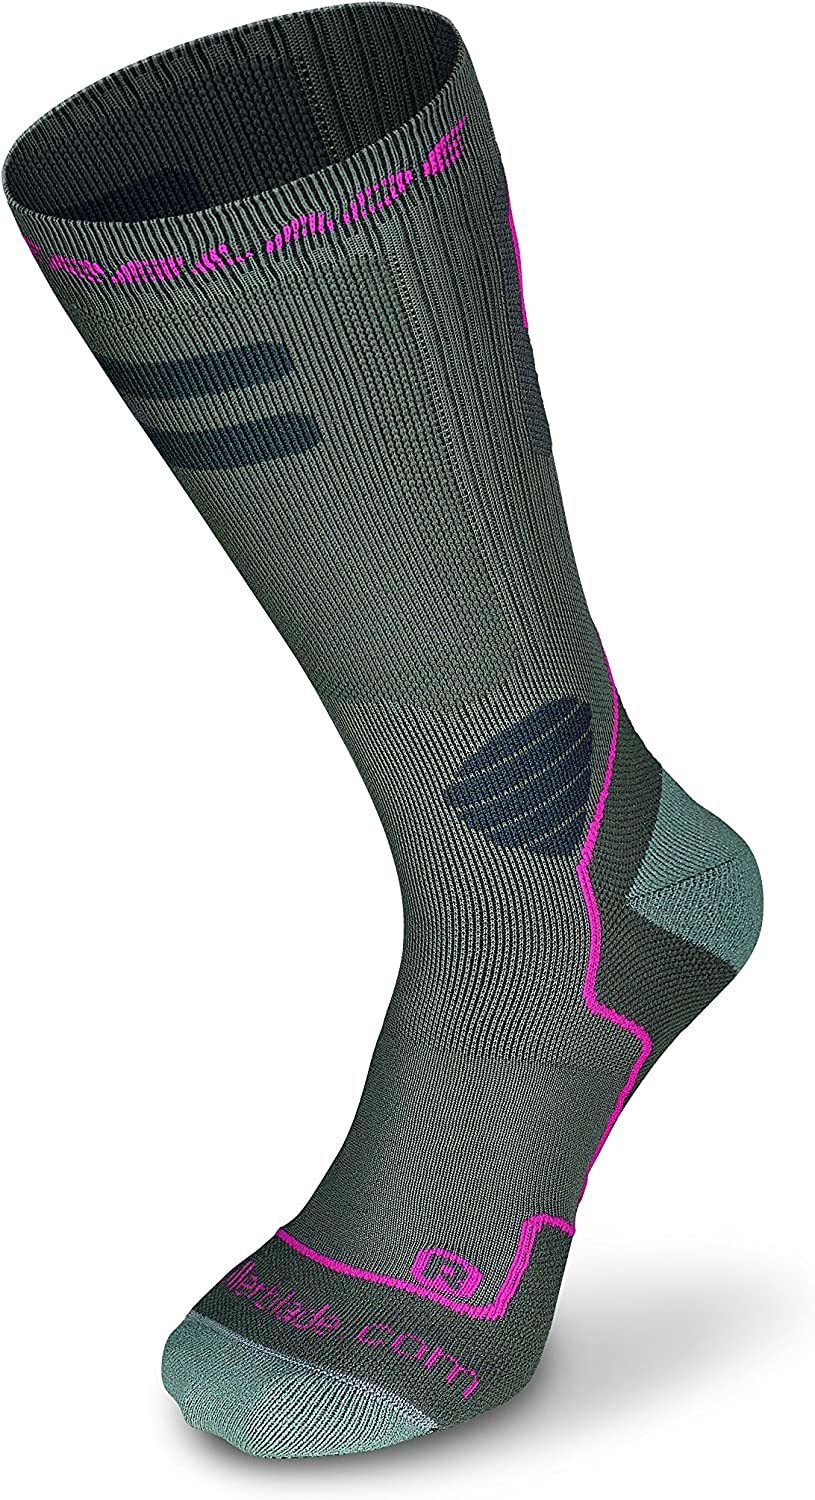 Primary image for Inline Skating, Multi-Sport, Dark Grey, And Pink Rollerblade High Performance